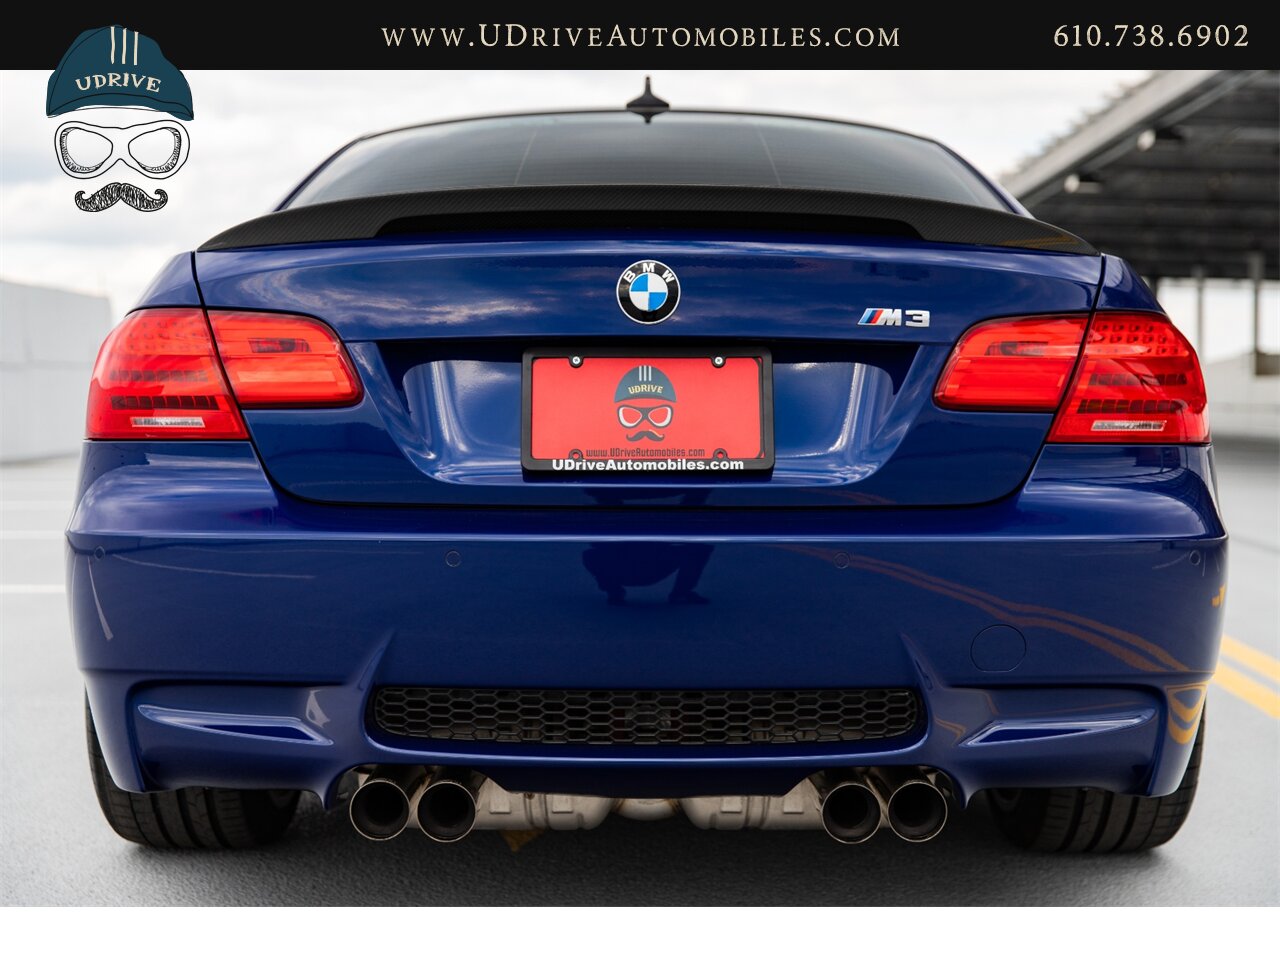 2011 BMW M3 E92 6 Speed Manual Competition Pkg Interlagos Blue  16k Miles Nav PDC EDC Comf Acc - Photo 21 - West Chester, PA 19382